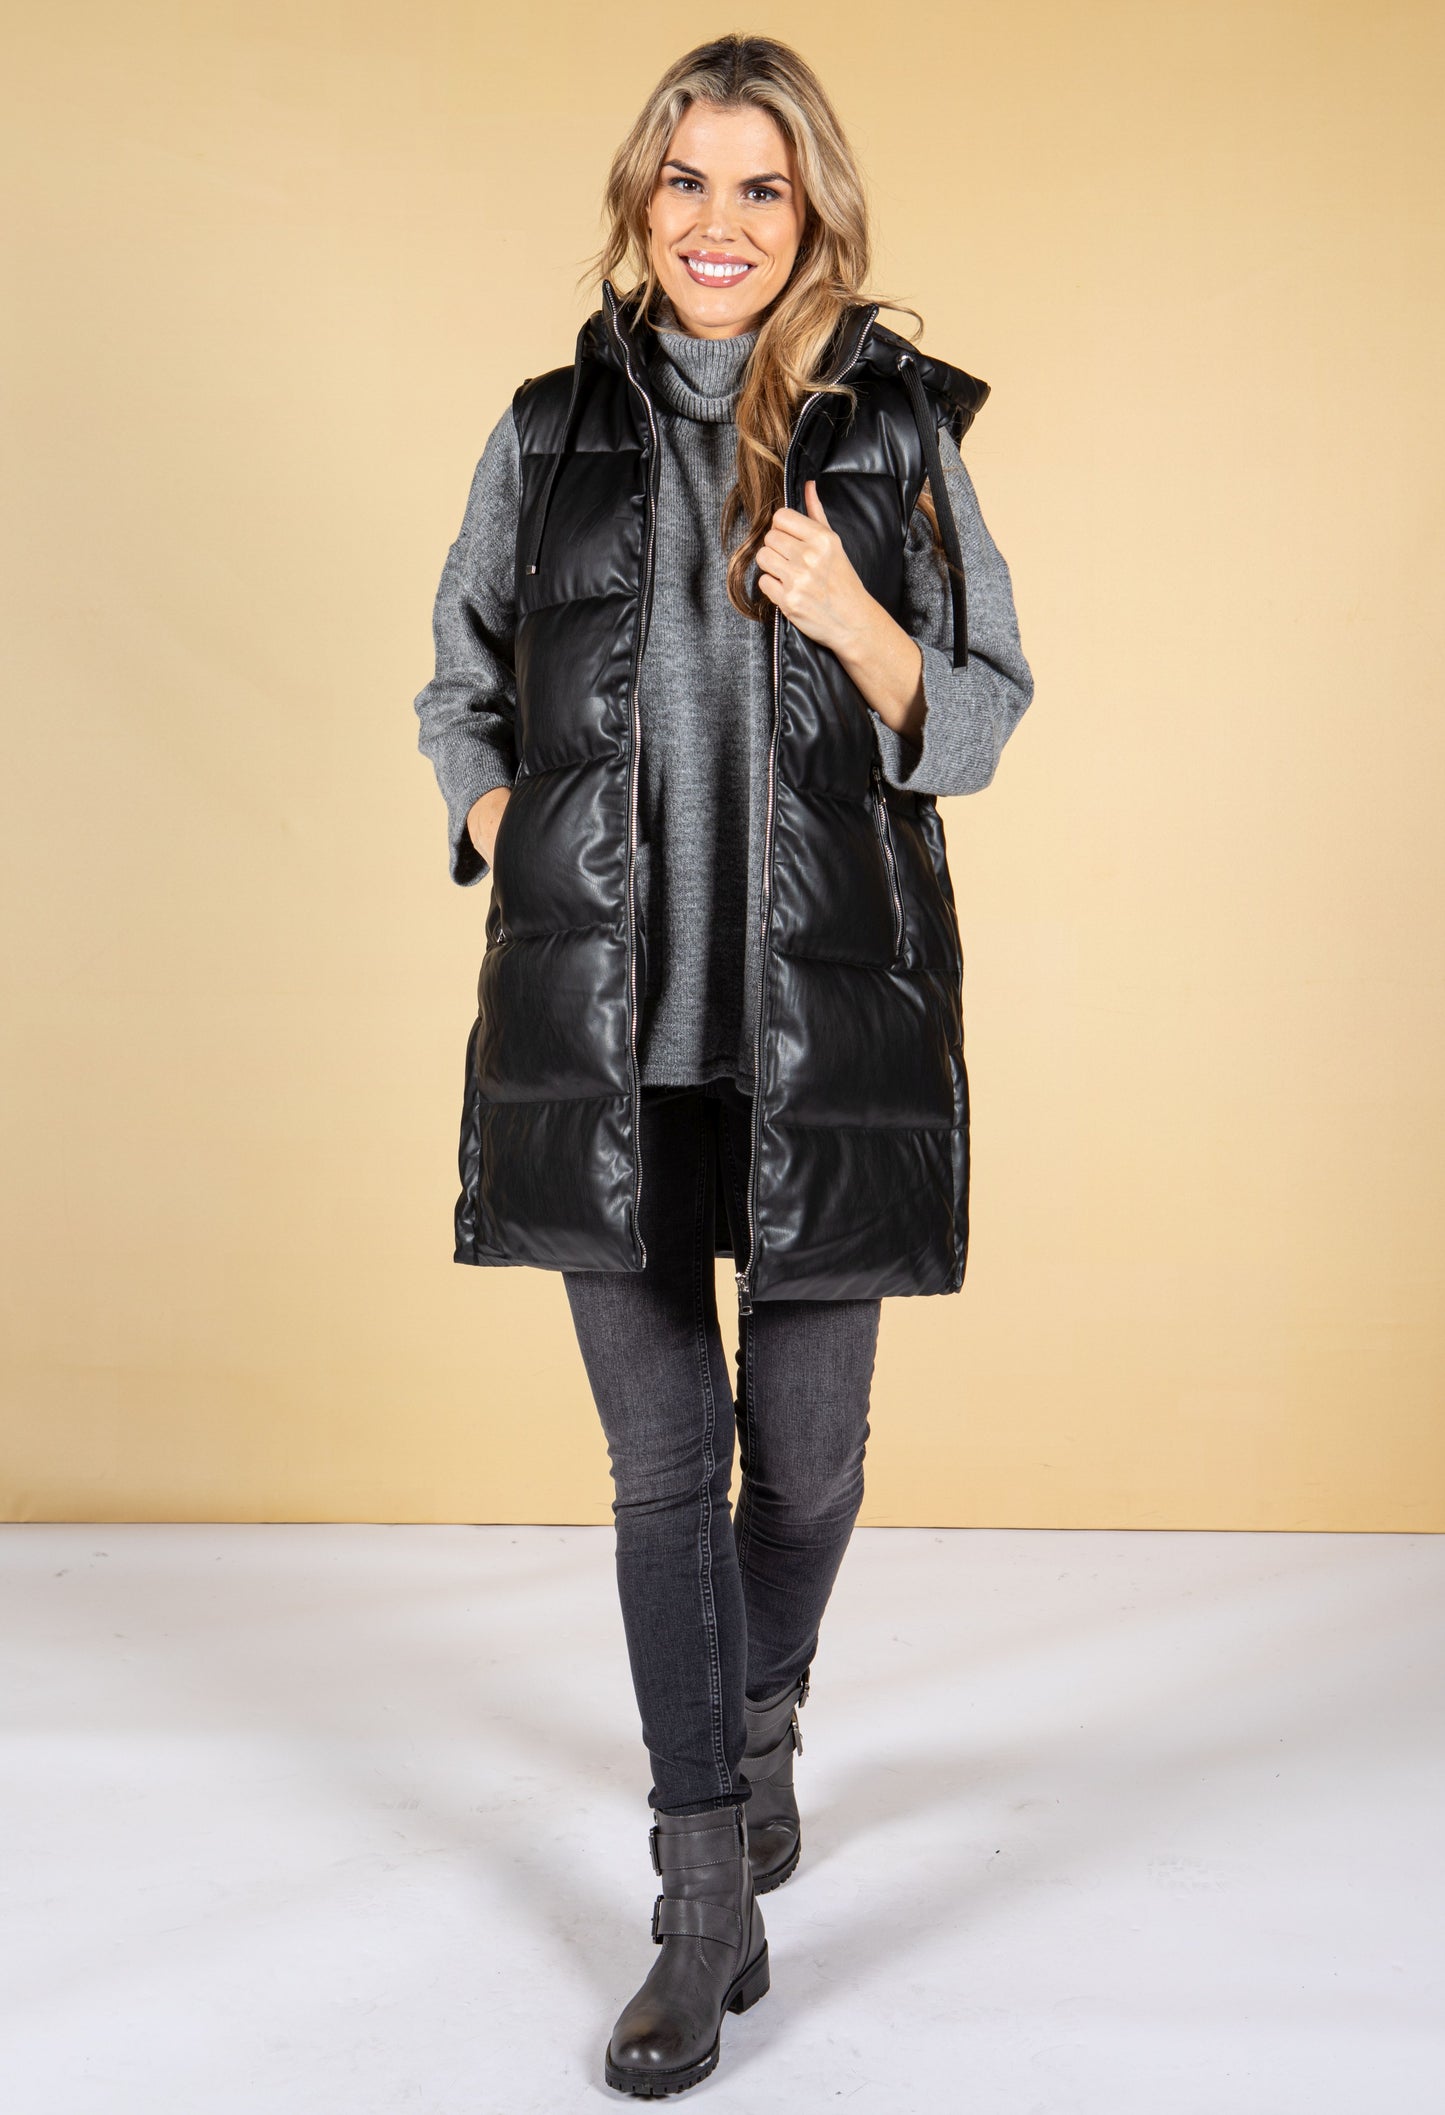 Faux Leather Gilet in Black